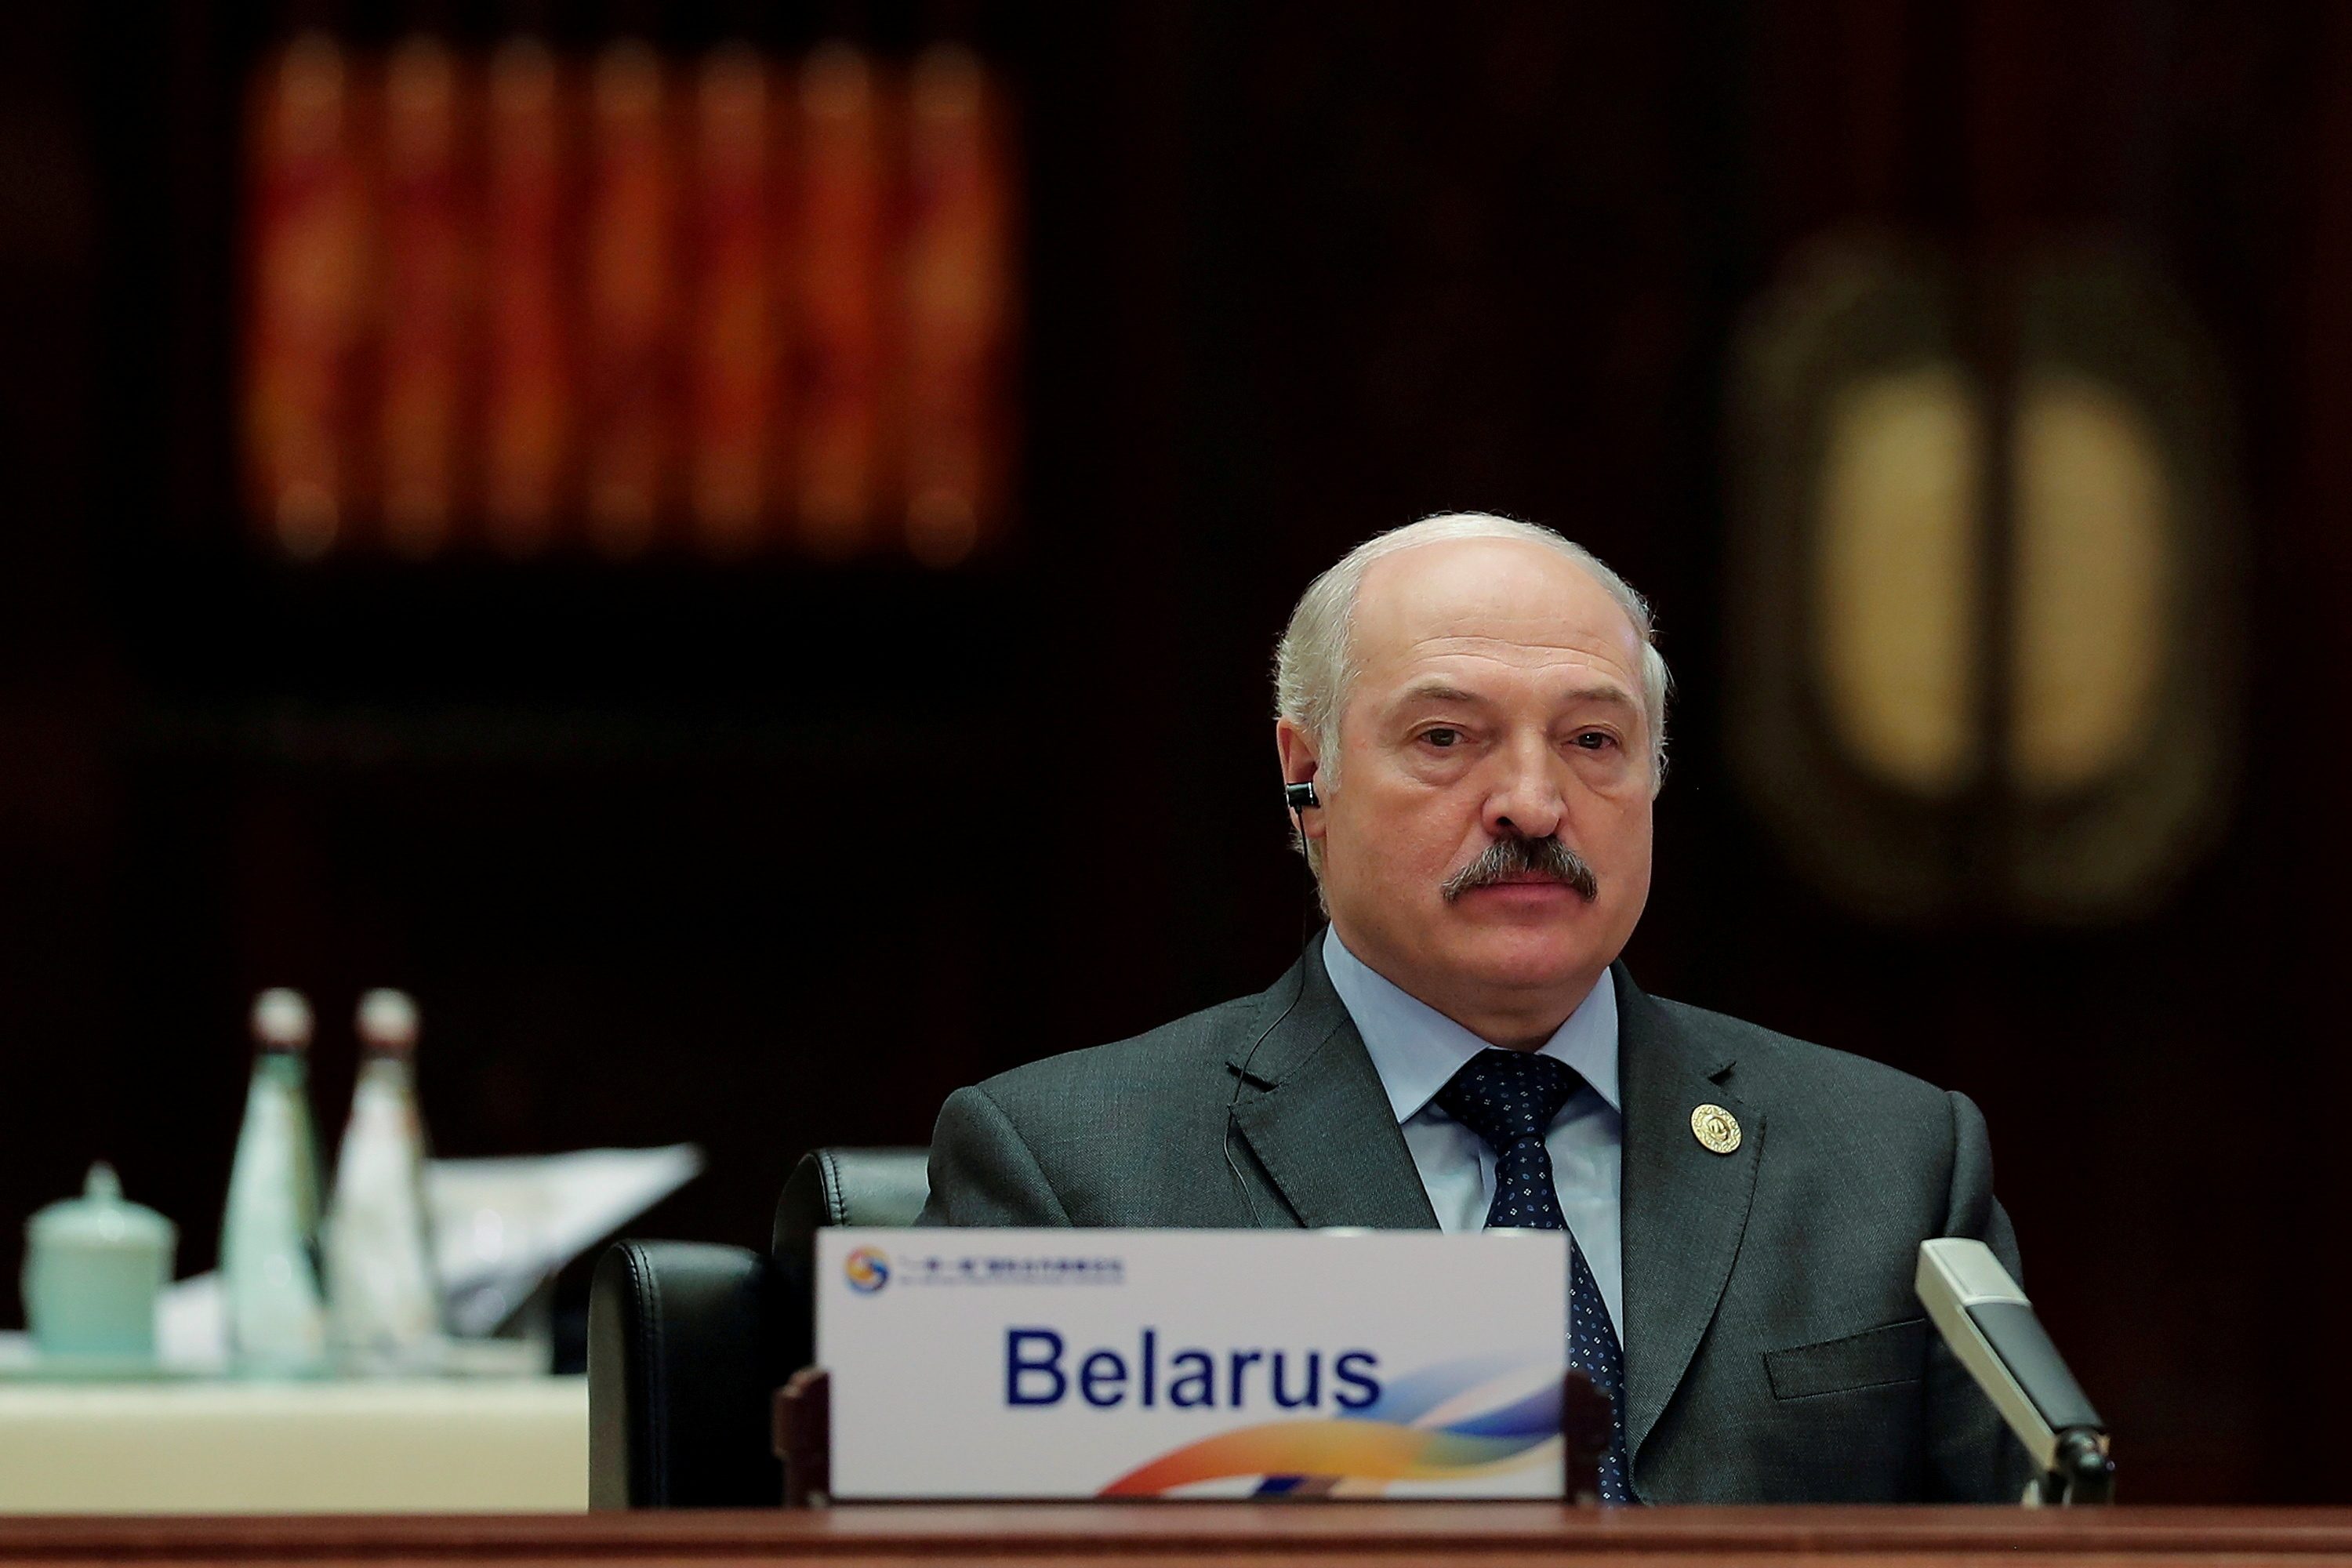 Belarus conducts new raids on journalists and rights activists